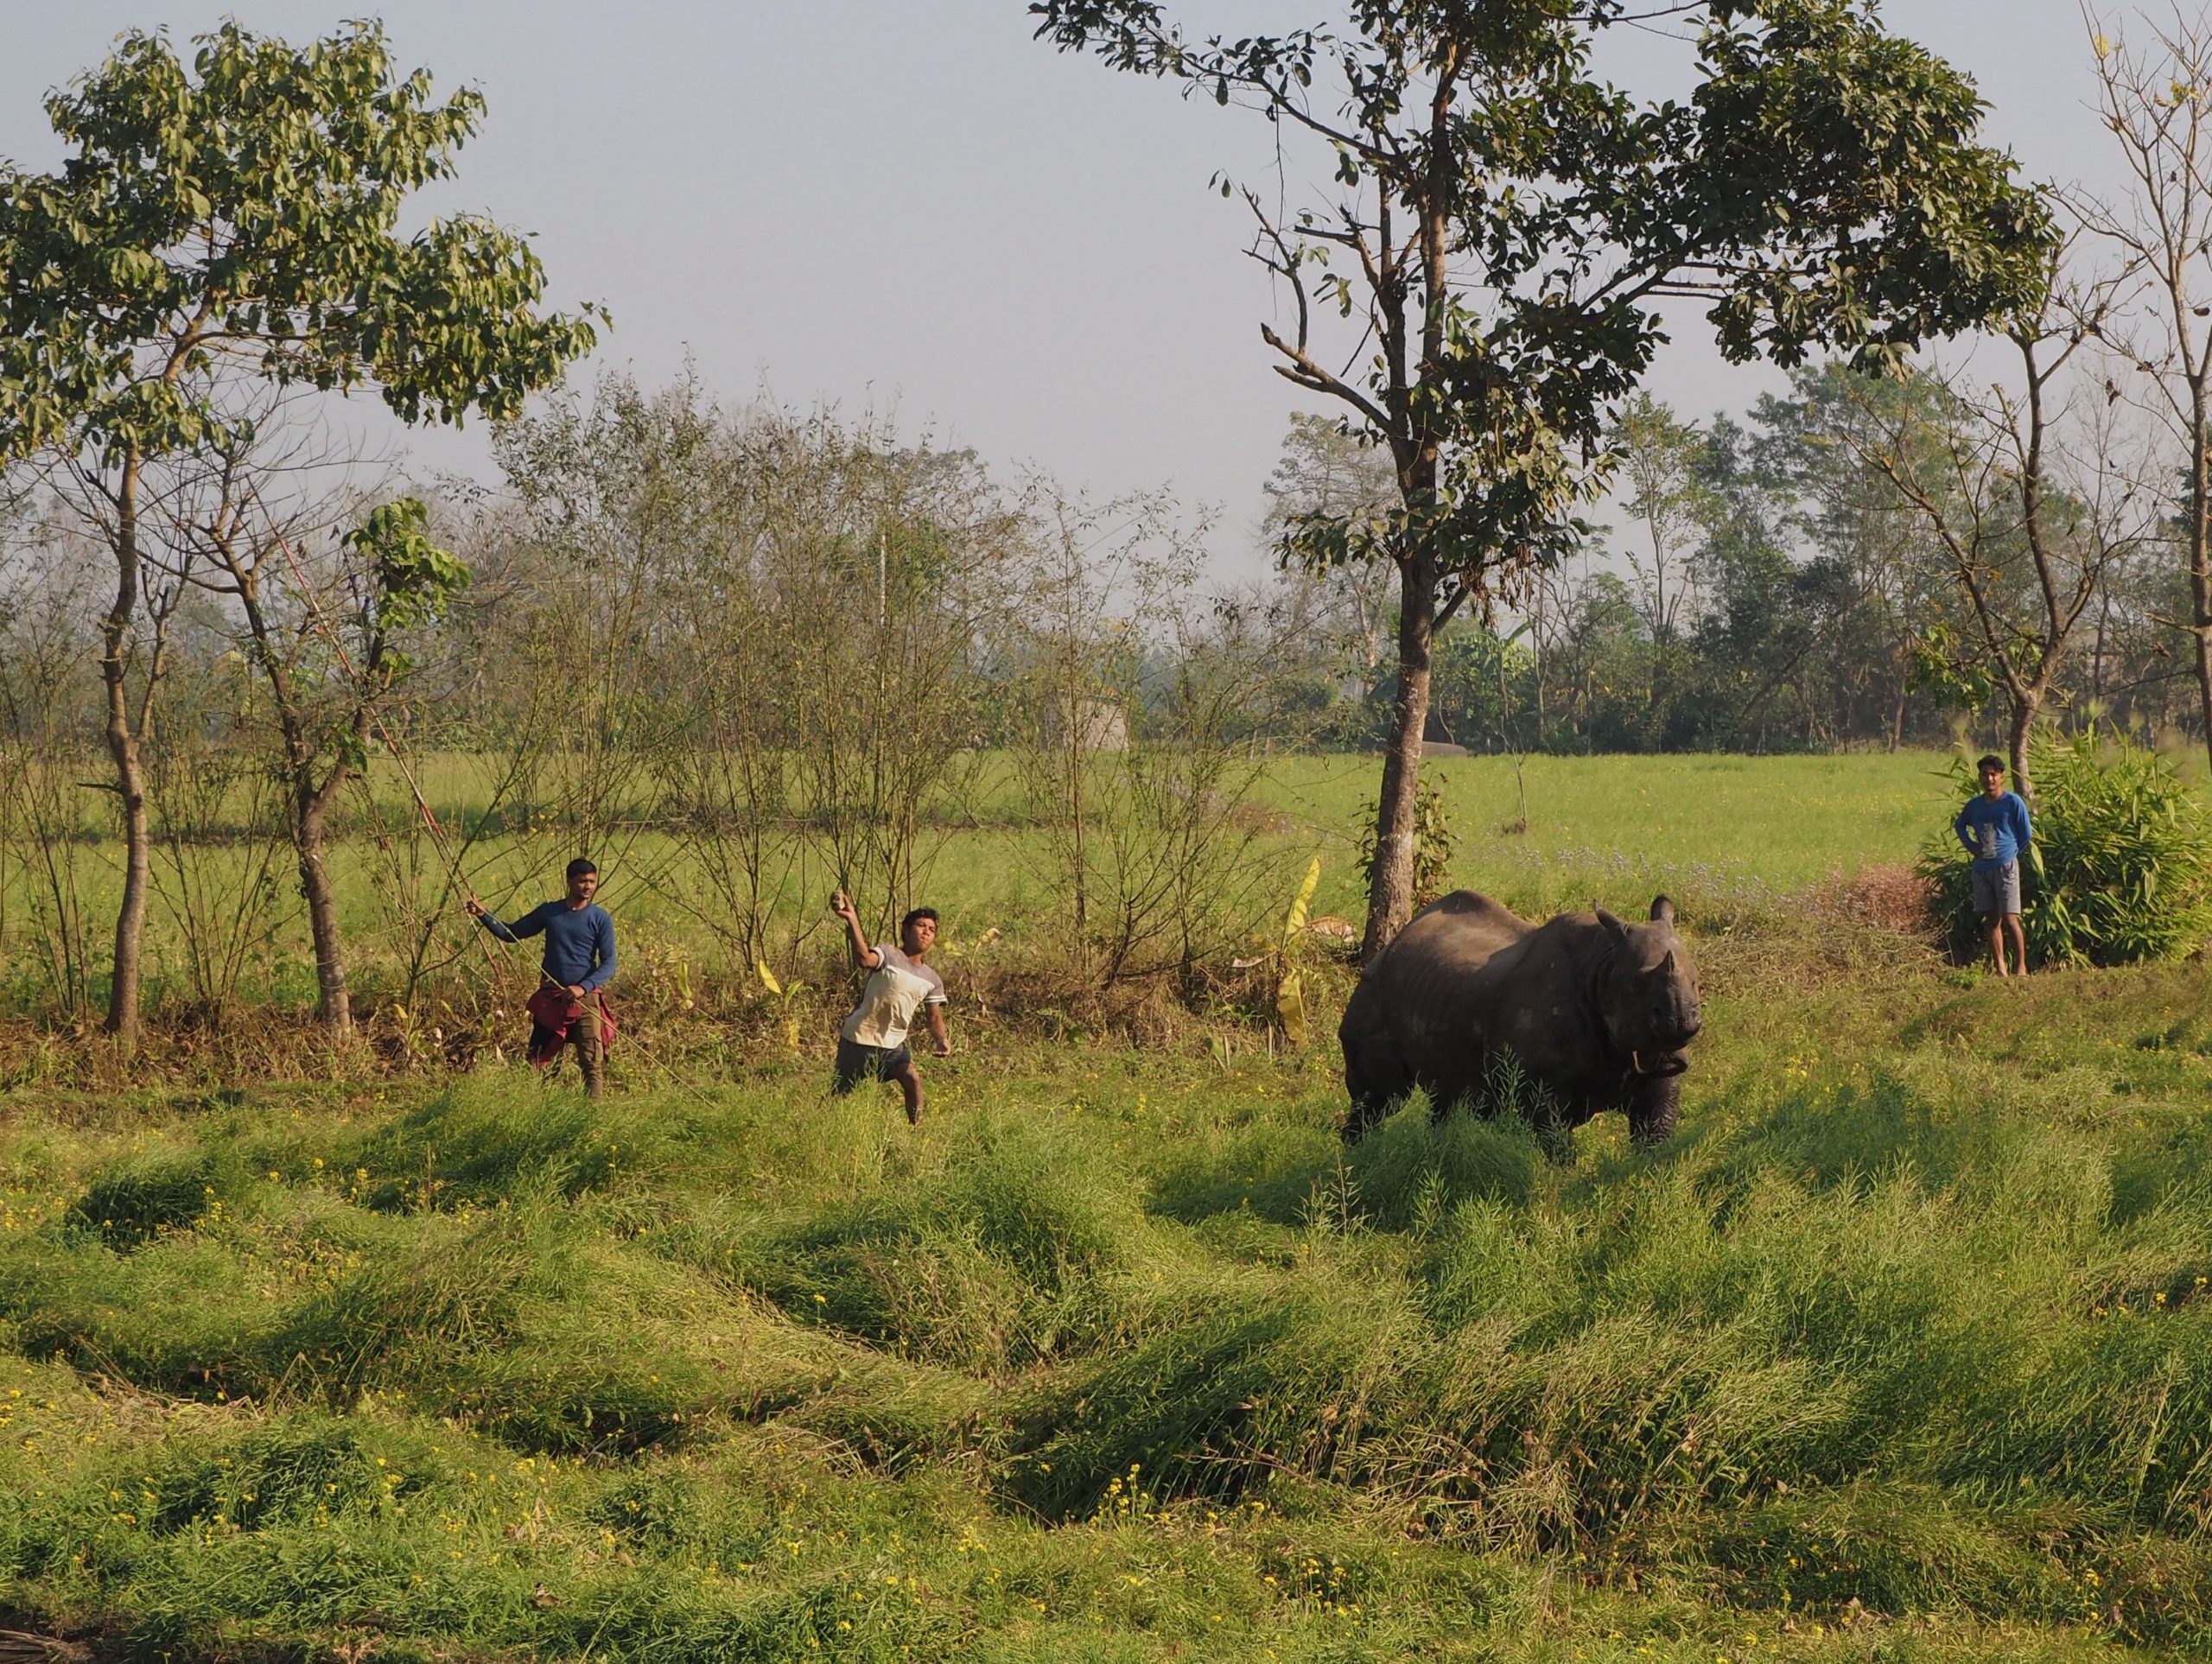 <p>Villagers and park staff try to scare a rhinoceros away from crops in Bachhauli village (Image: Peter Gill)</p>